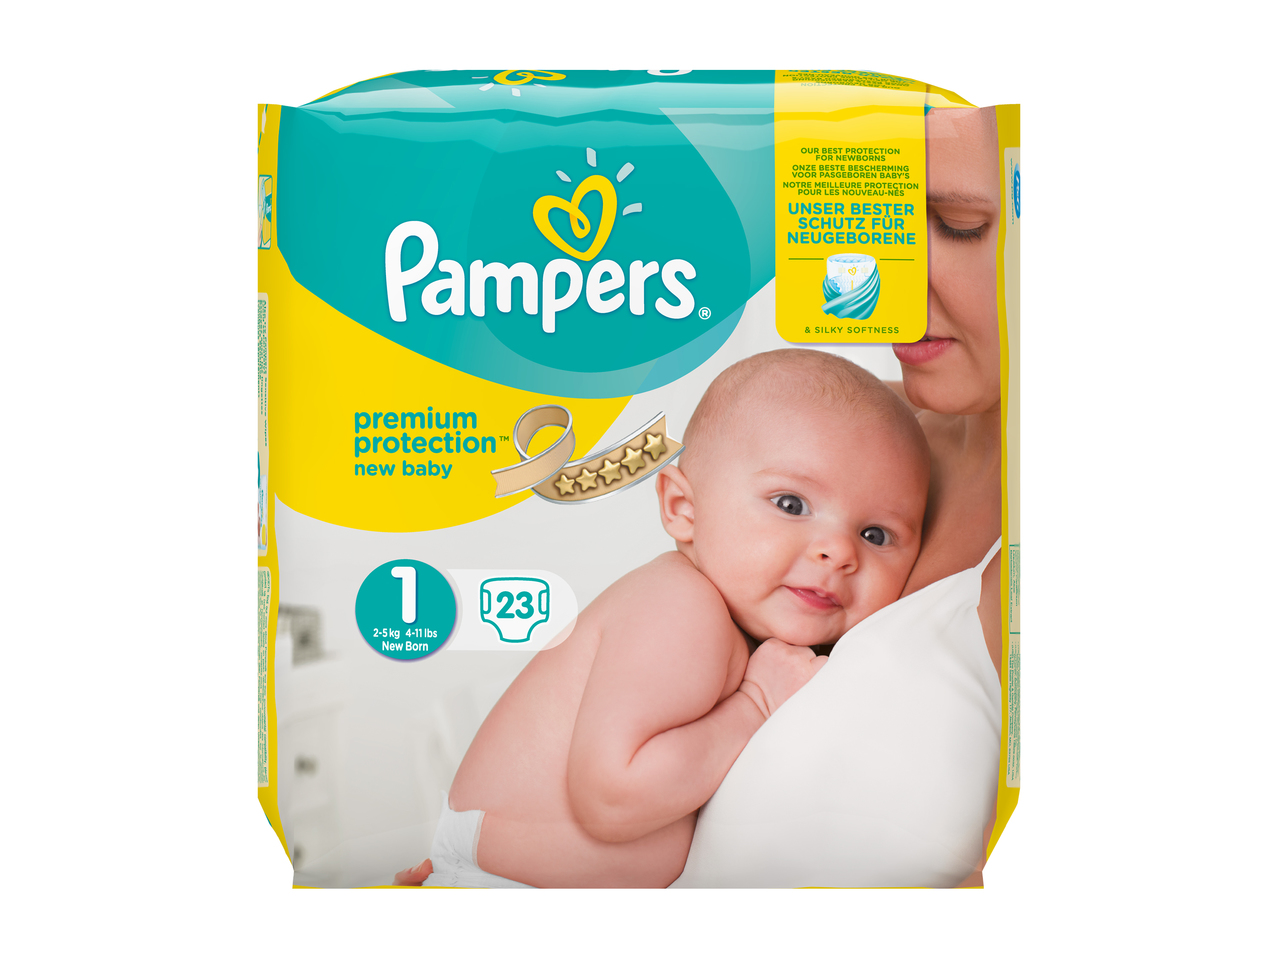 Pampers couches newbaby